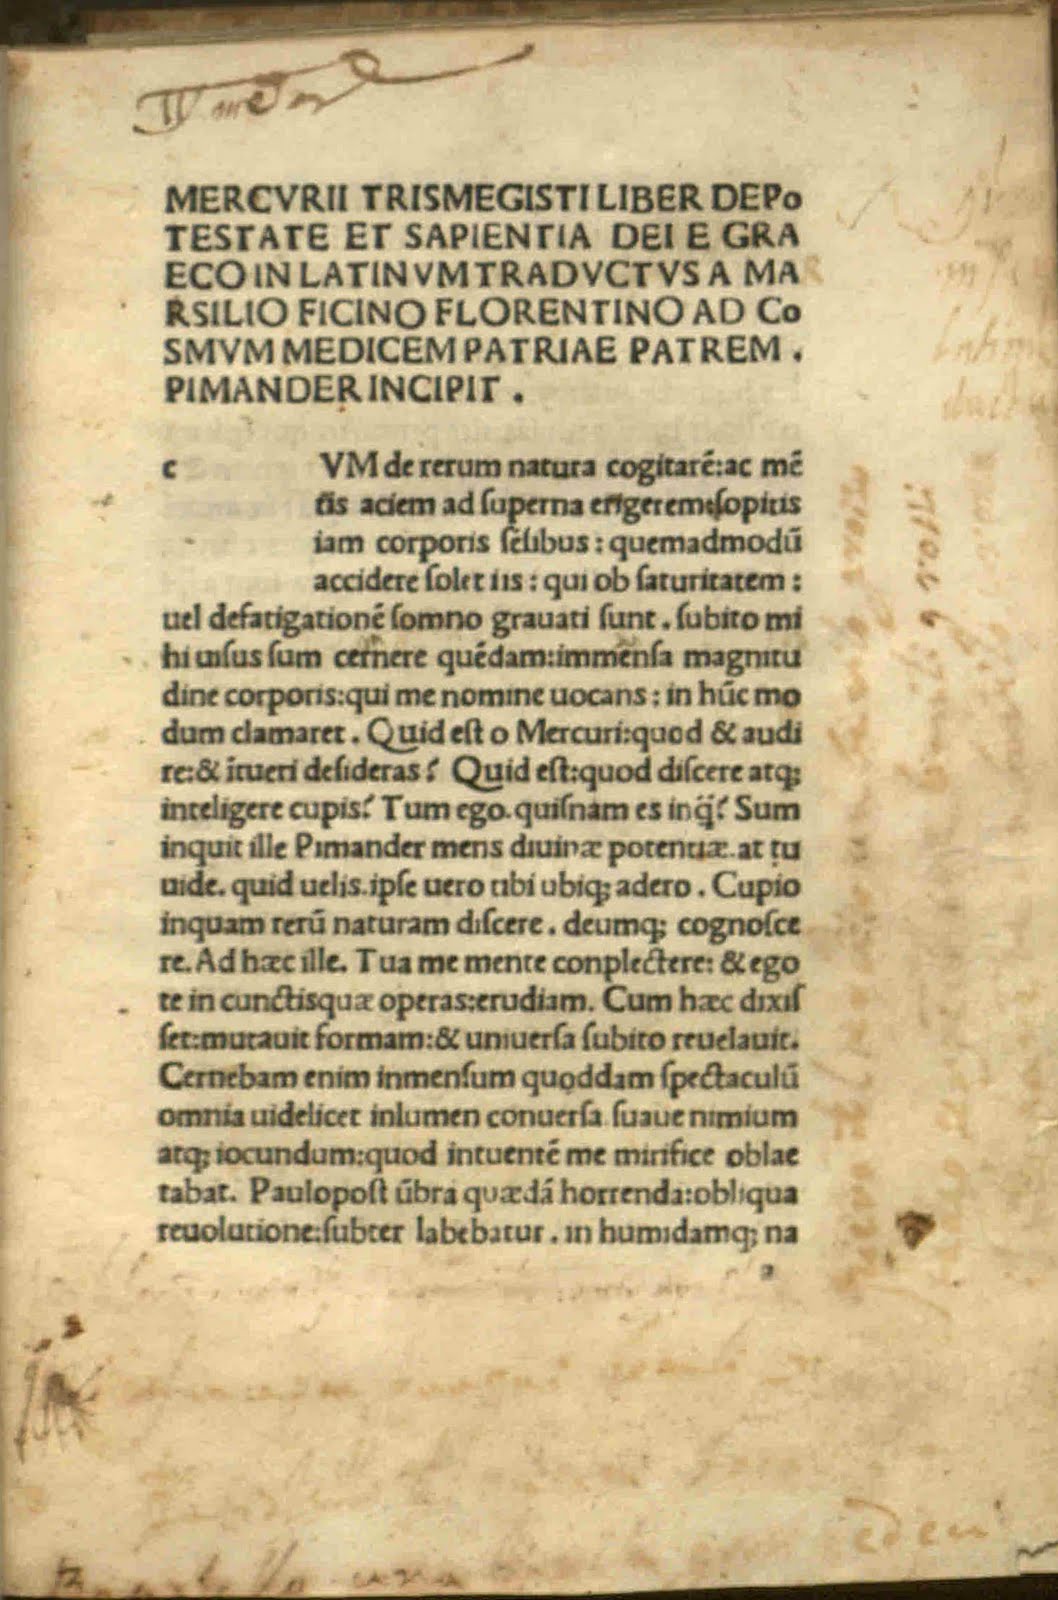 First page of Pimander, sive De potestate et sapientia Dei with margin notes